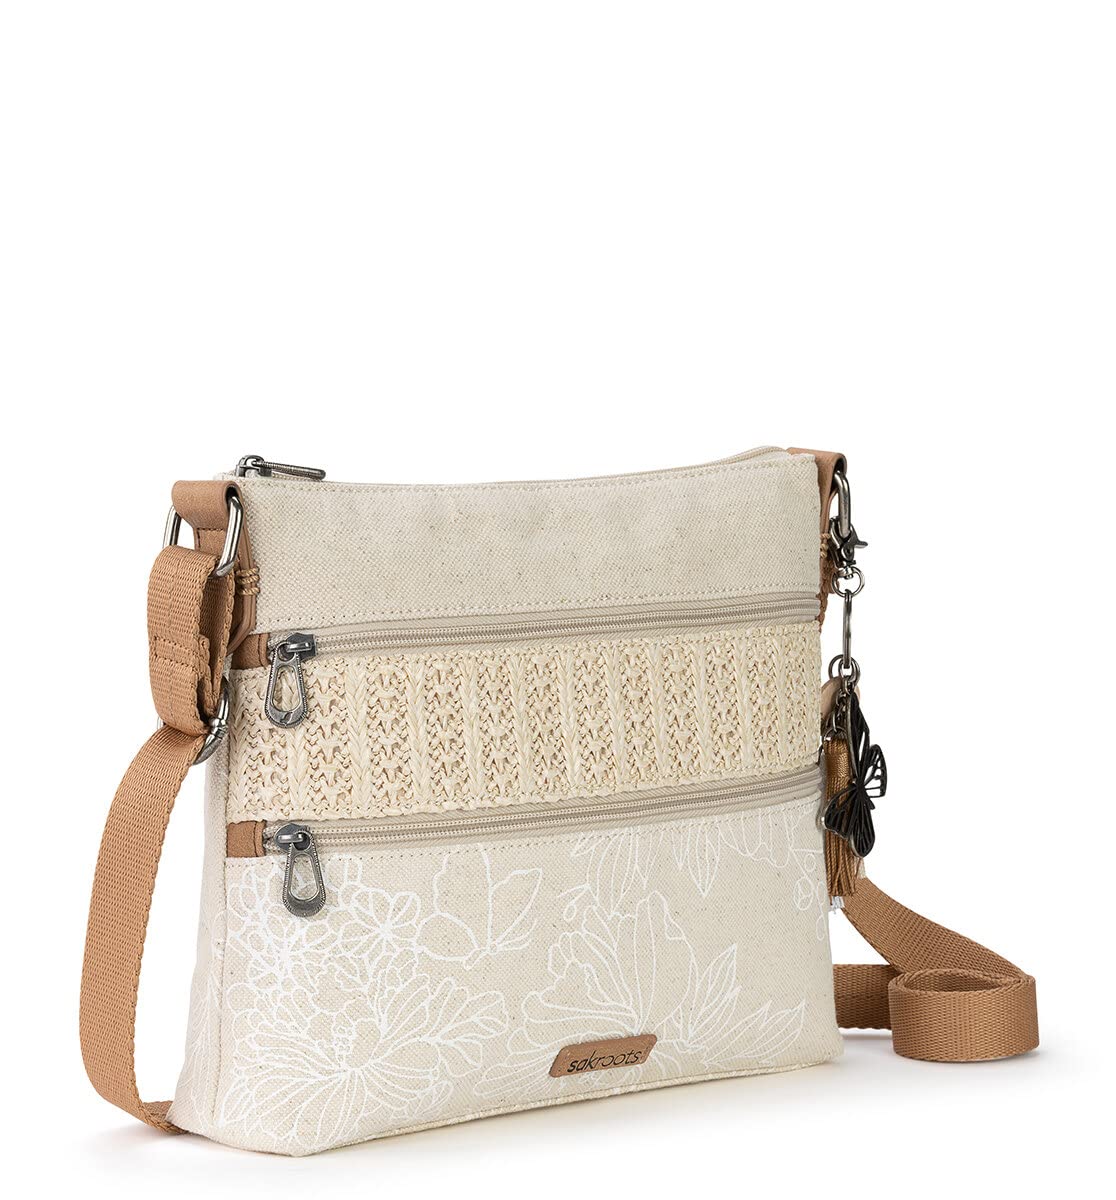 Sakroots Artist Circle Crossbody Bag in Coated Canvas, Multifunctional Purse with Adjustable Strap & Zipper Pockets